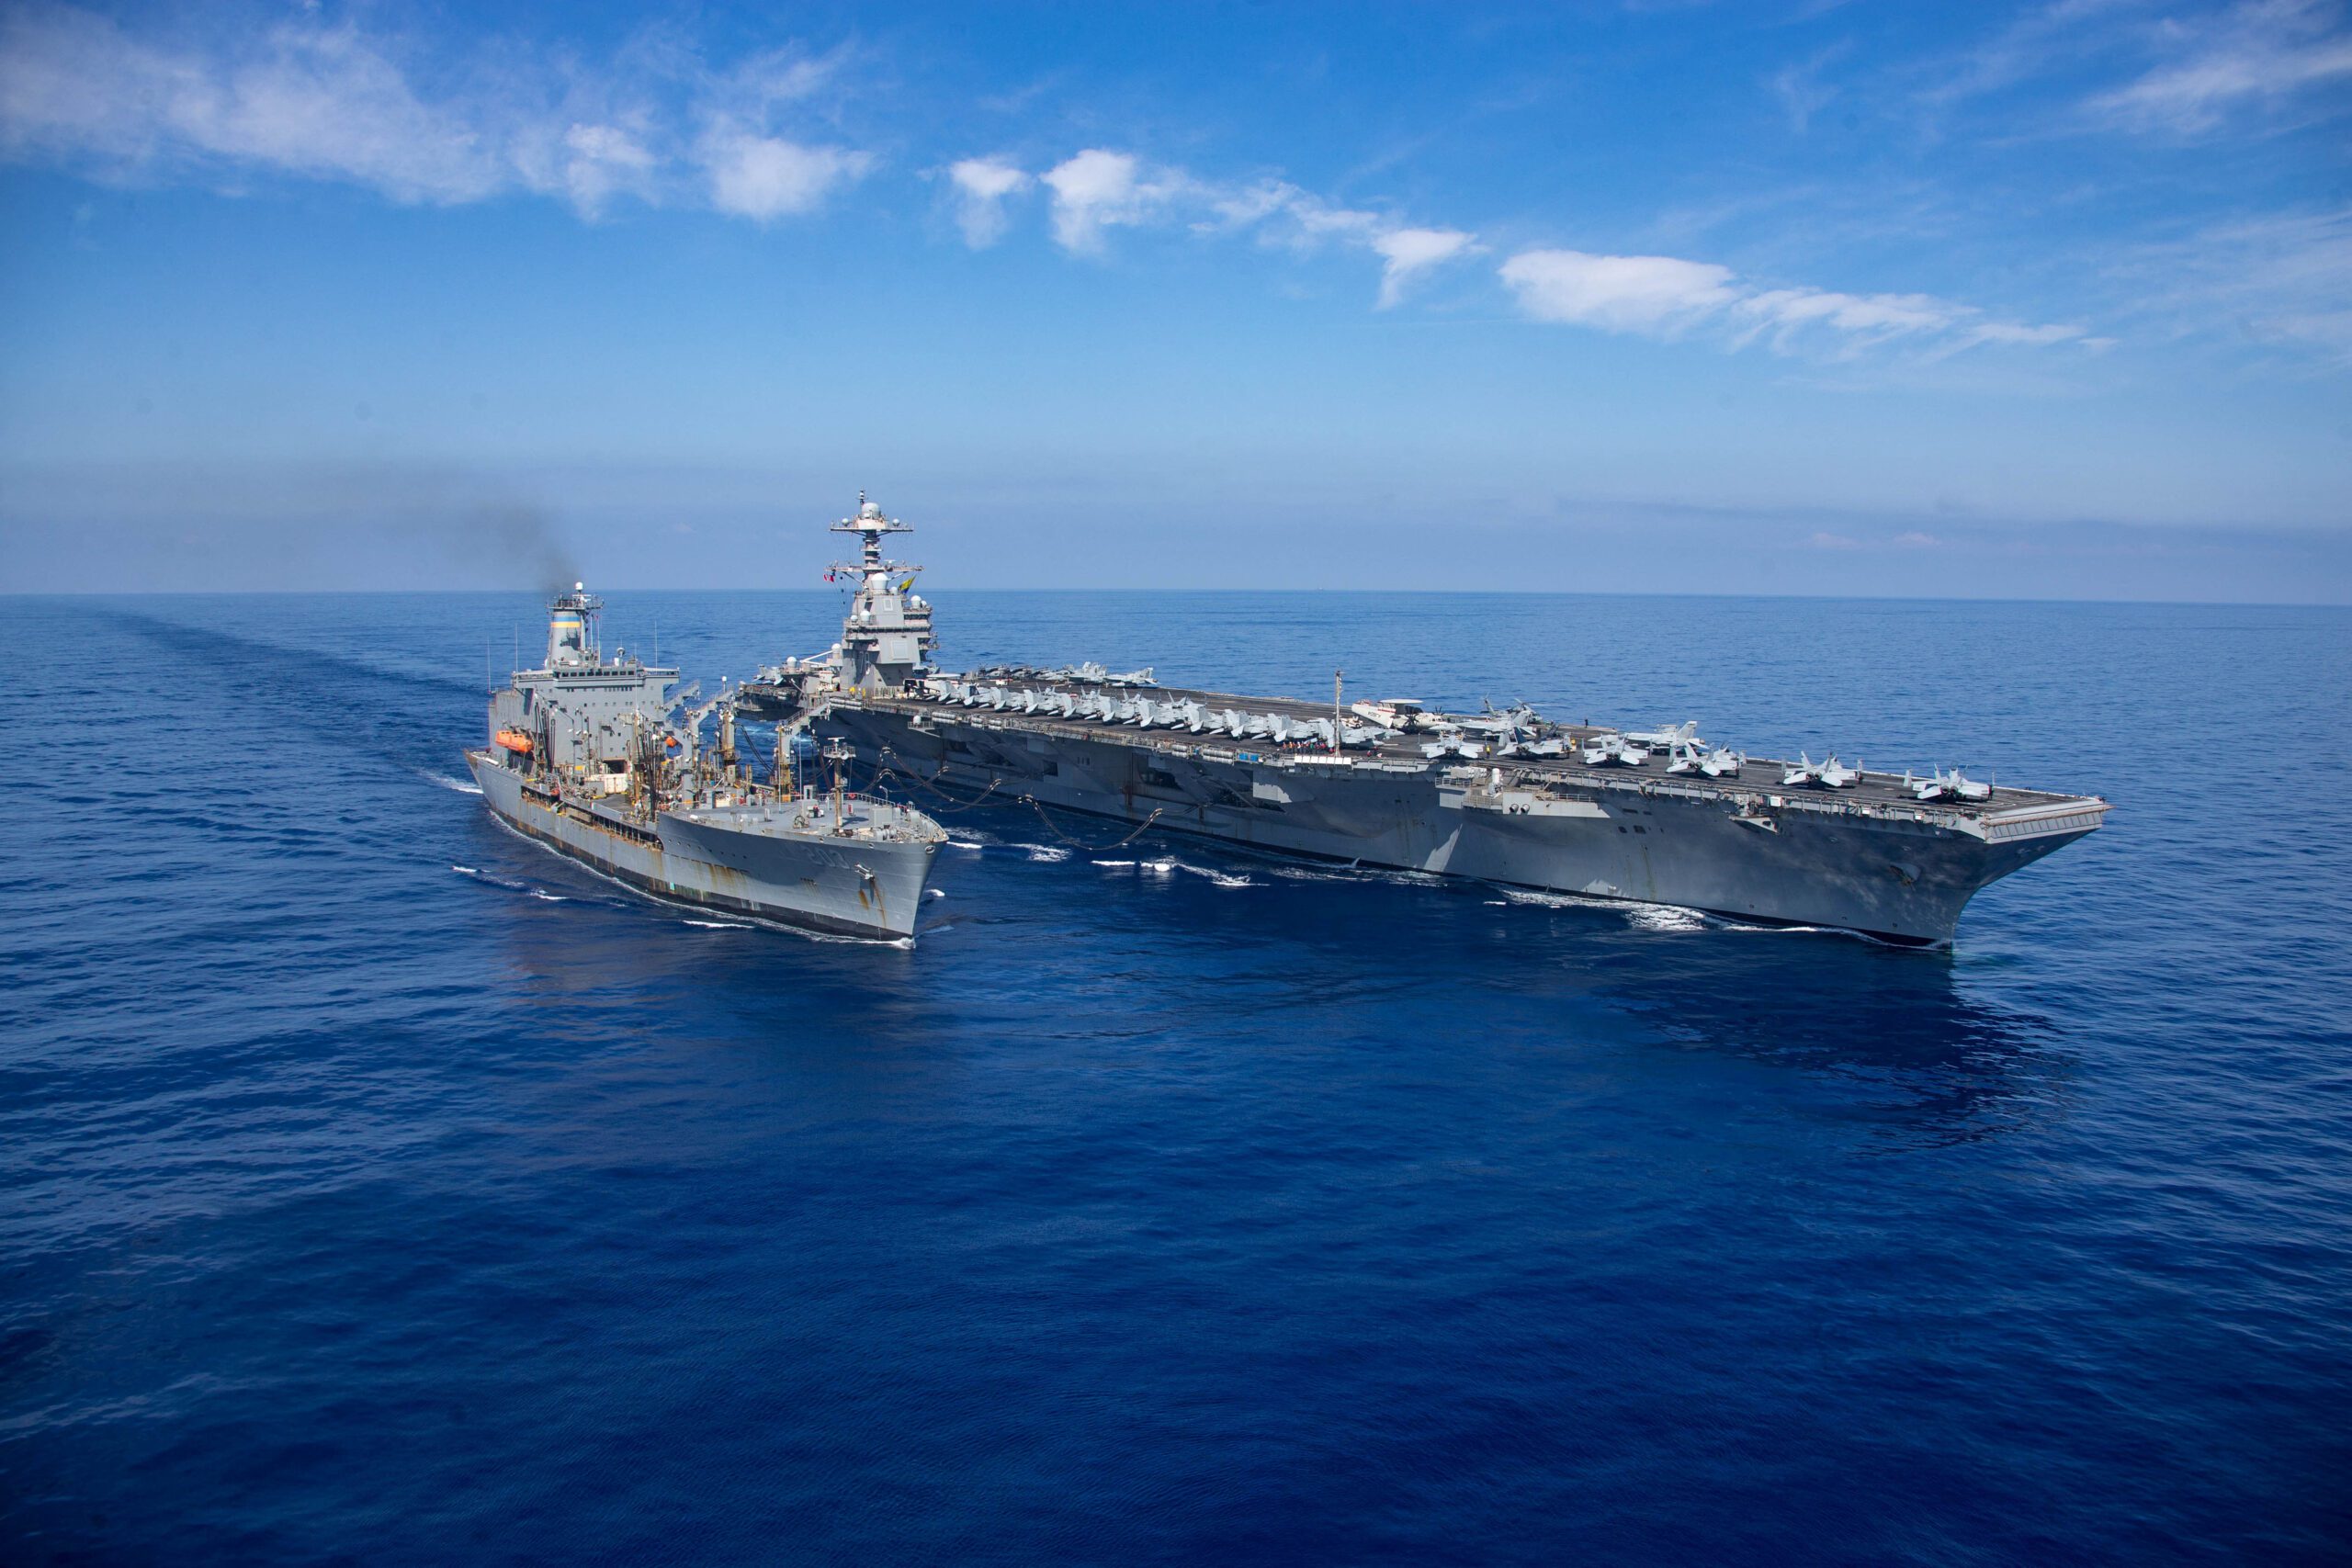 The world’s largest aircraft carrier USS Gerald R. Ford arrives at Mediterranean Sea. Handout via REUTERS